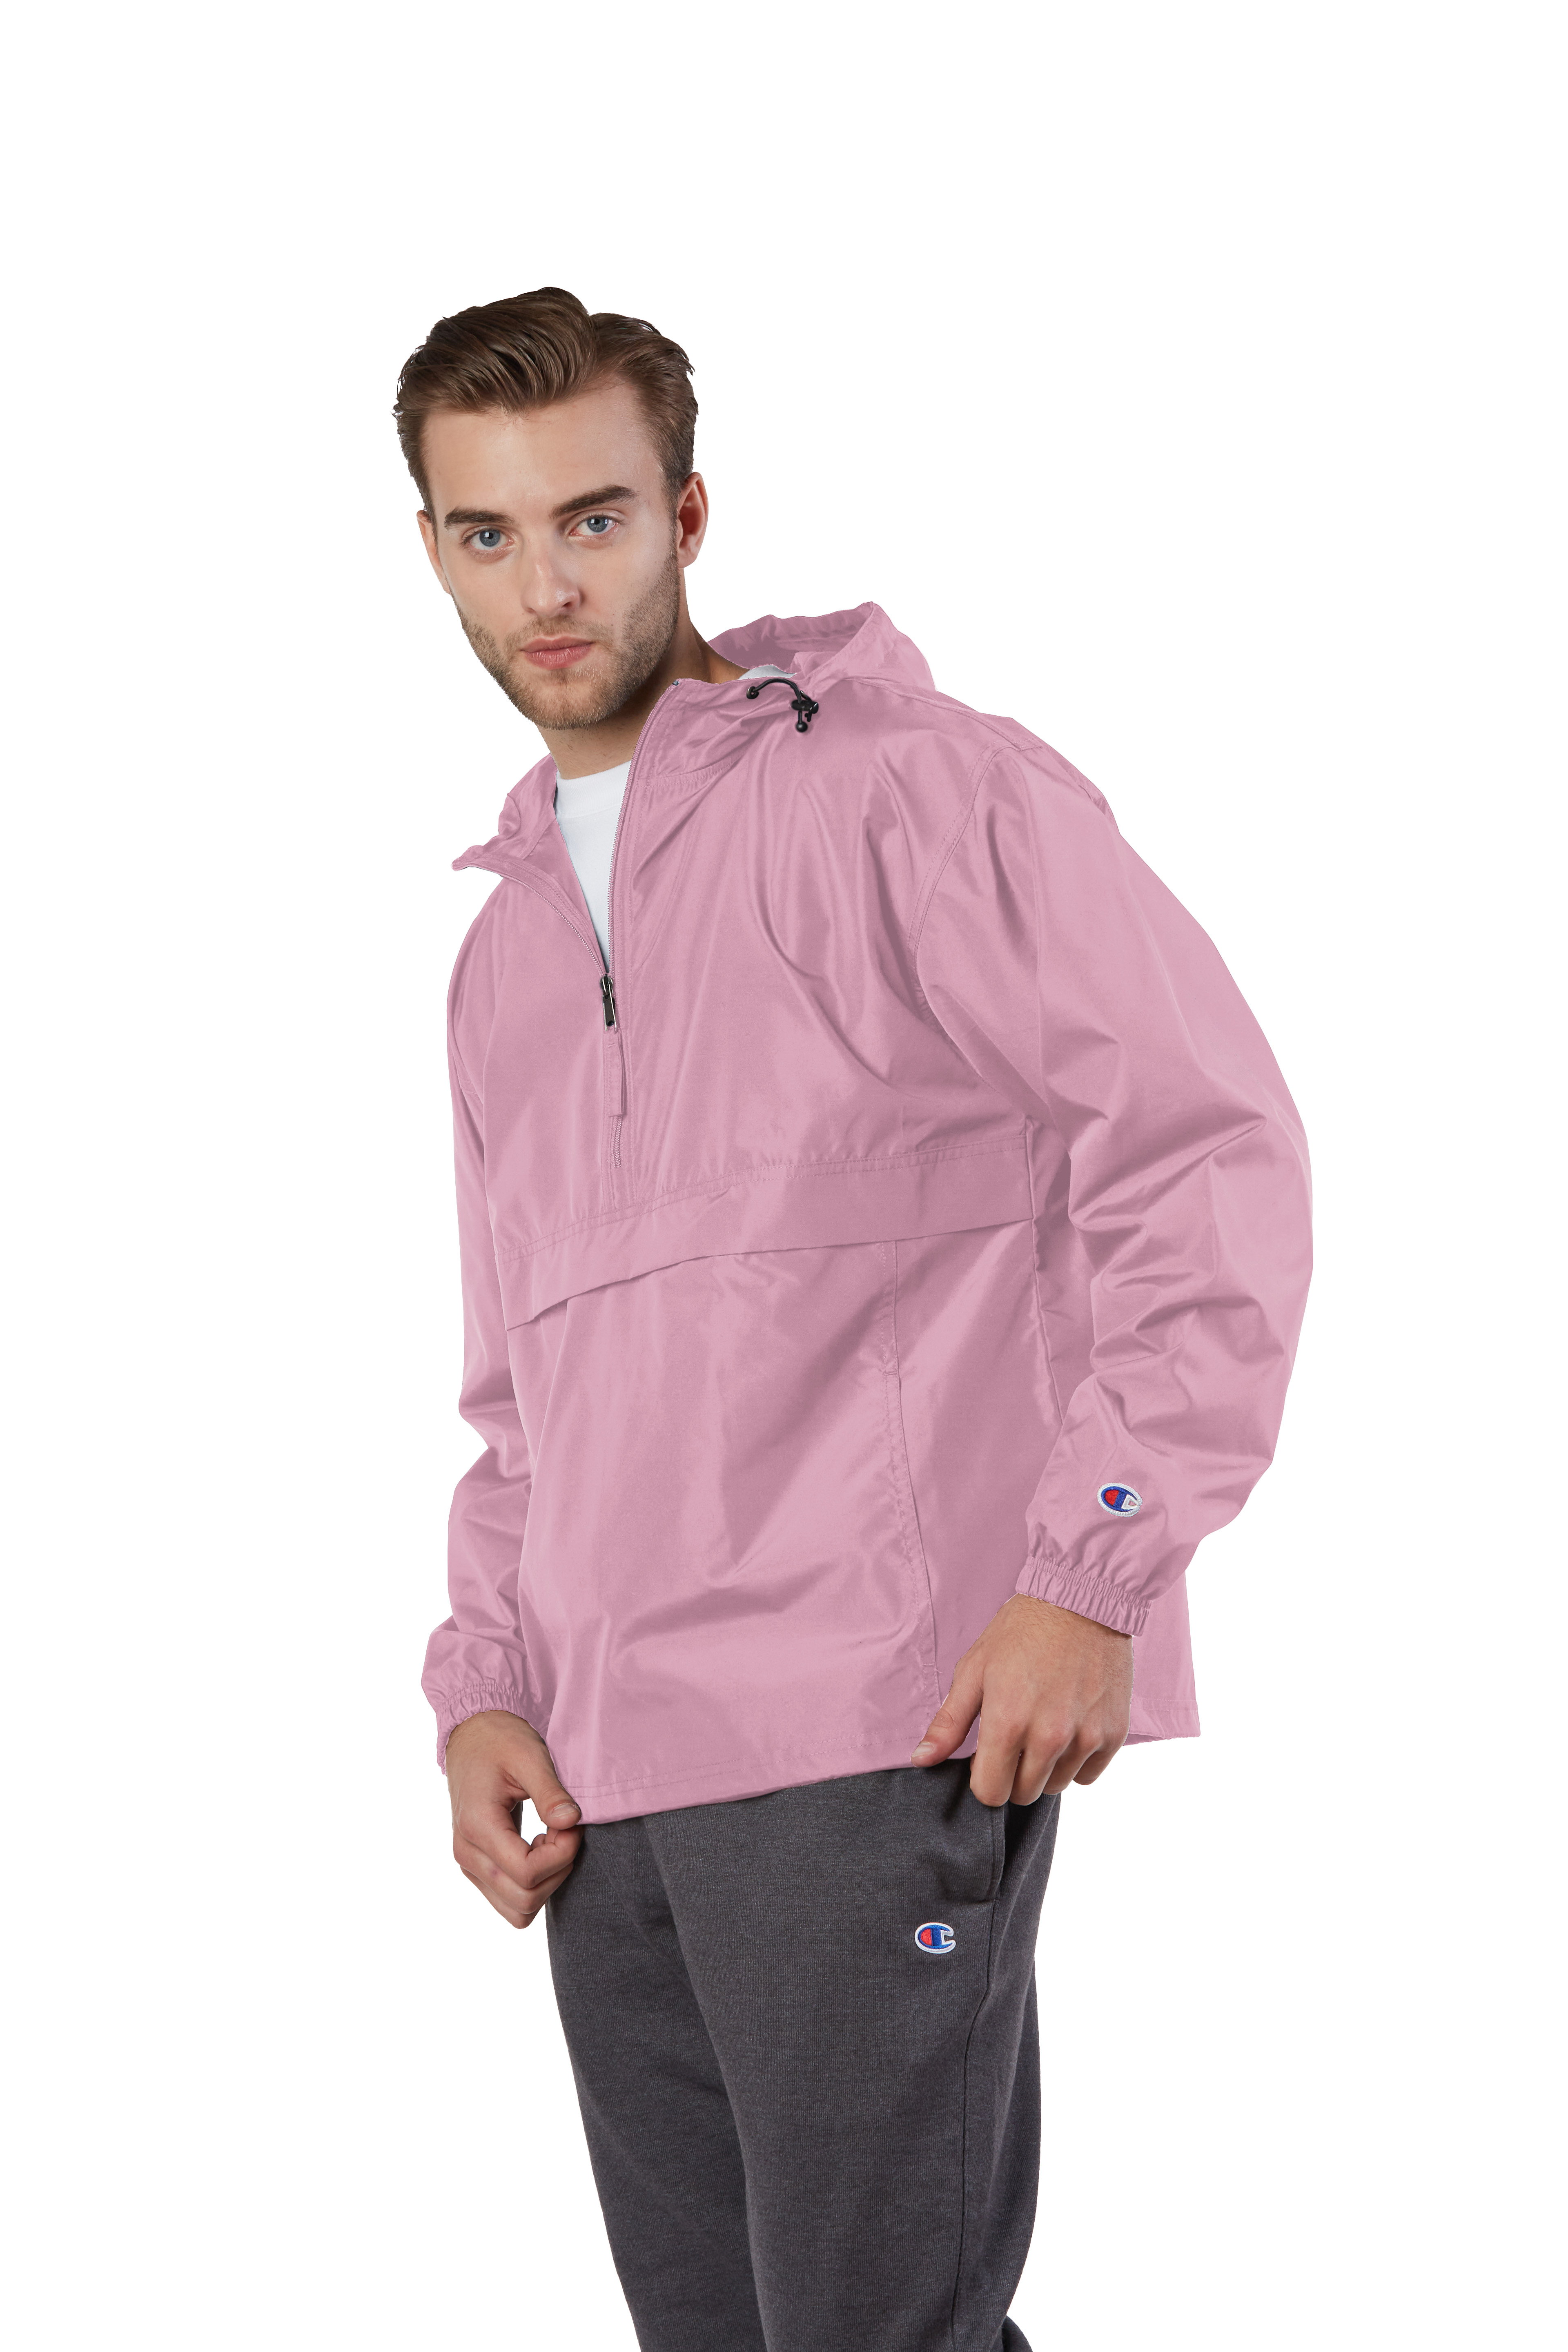 Champion Co200 Adult Packable Anorak 1/4 Zip Jacket | Jiffy Shirts